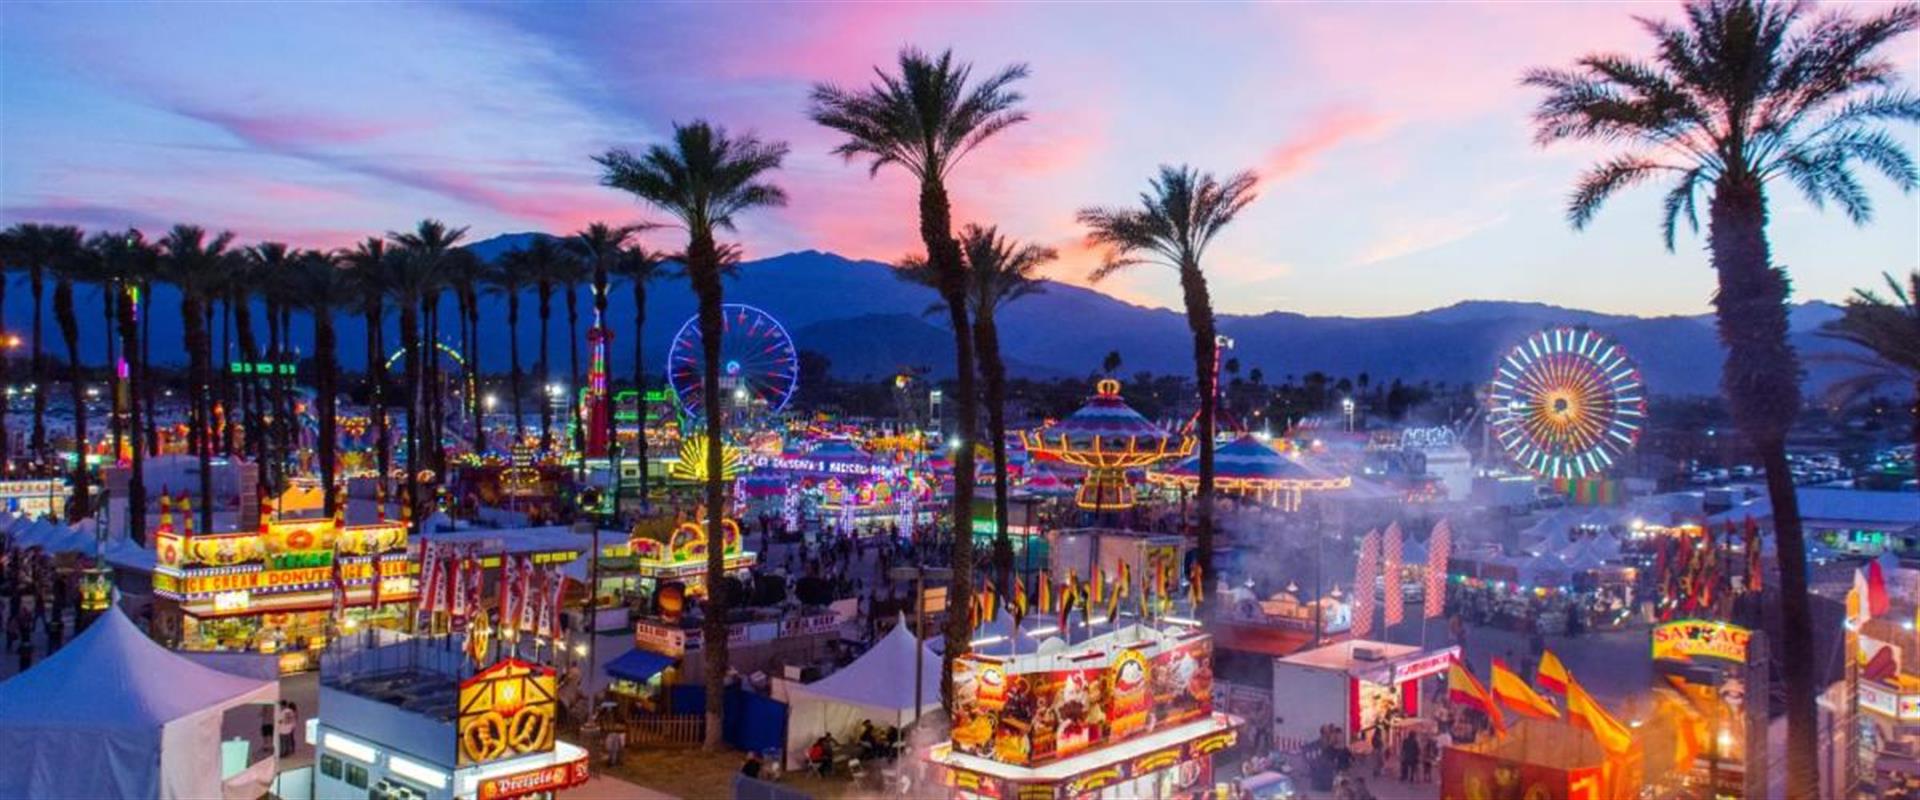 Image of a Sample Festival in Palm Springs